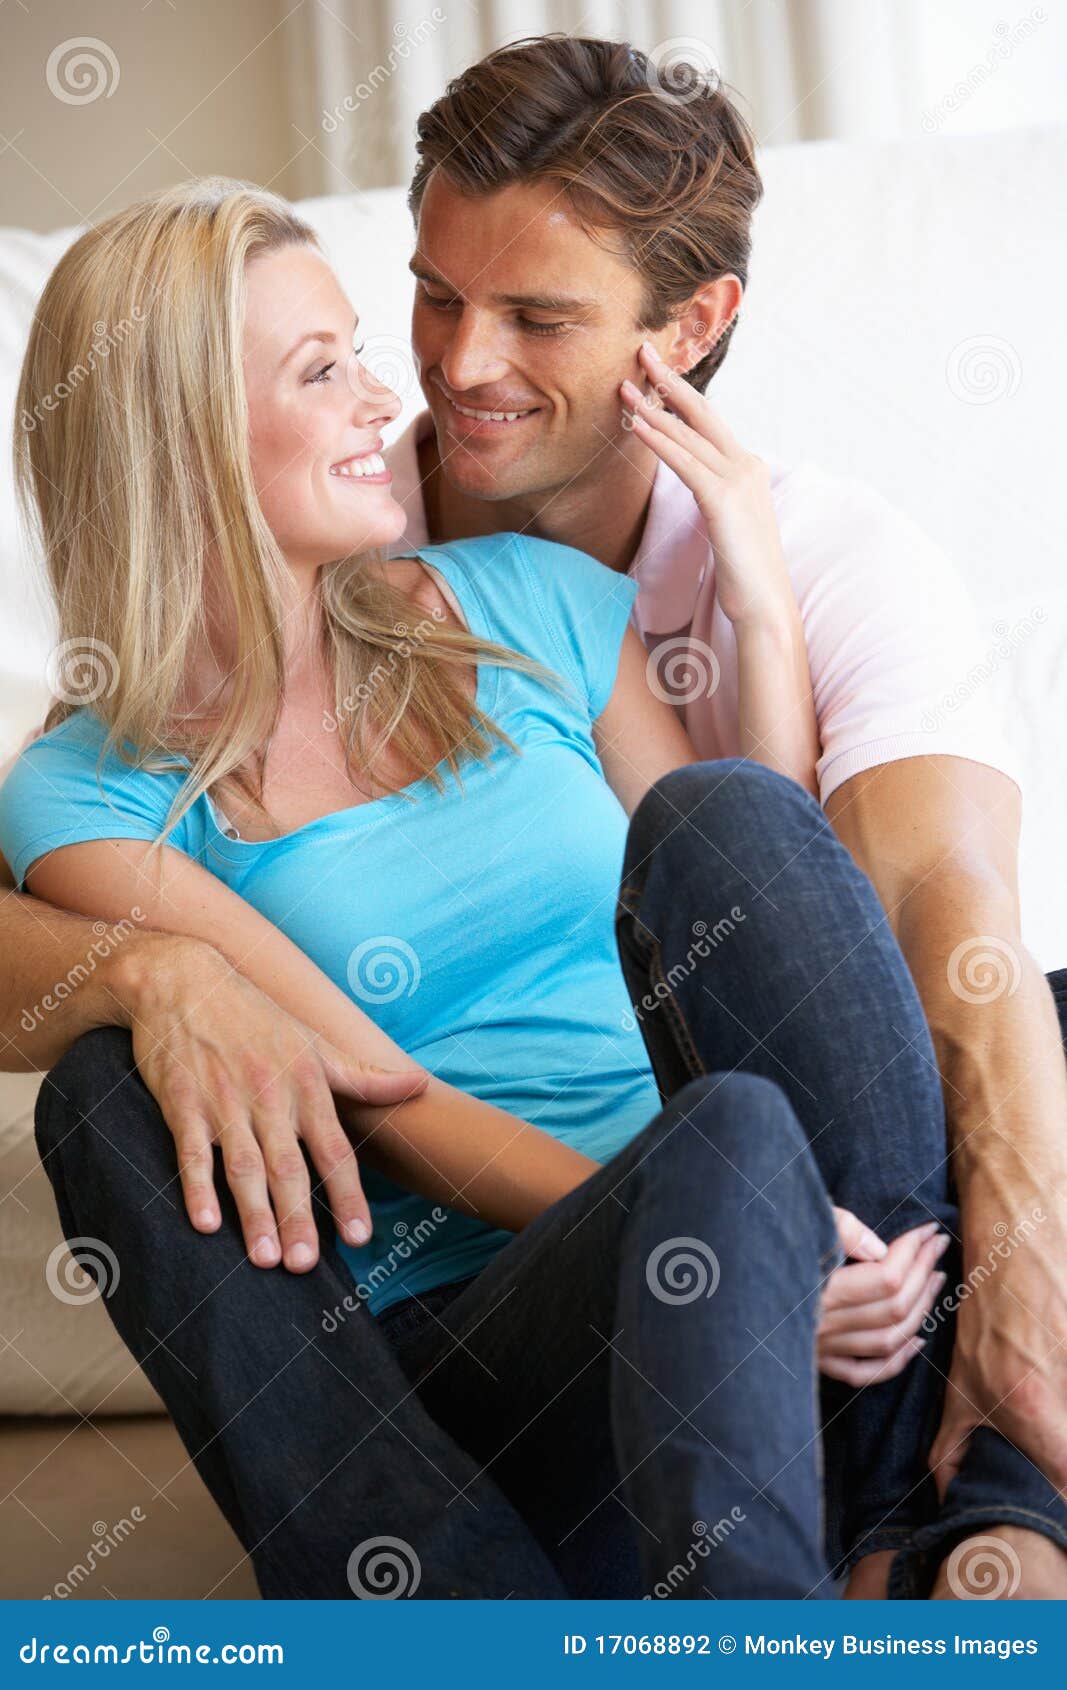 young couple posing indoors 17068892